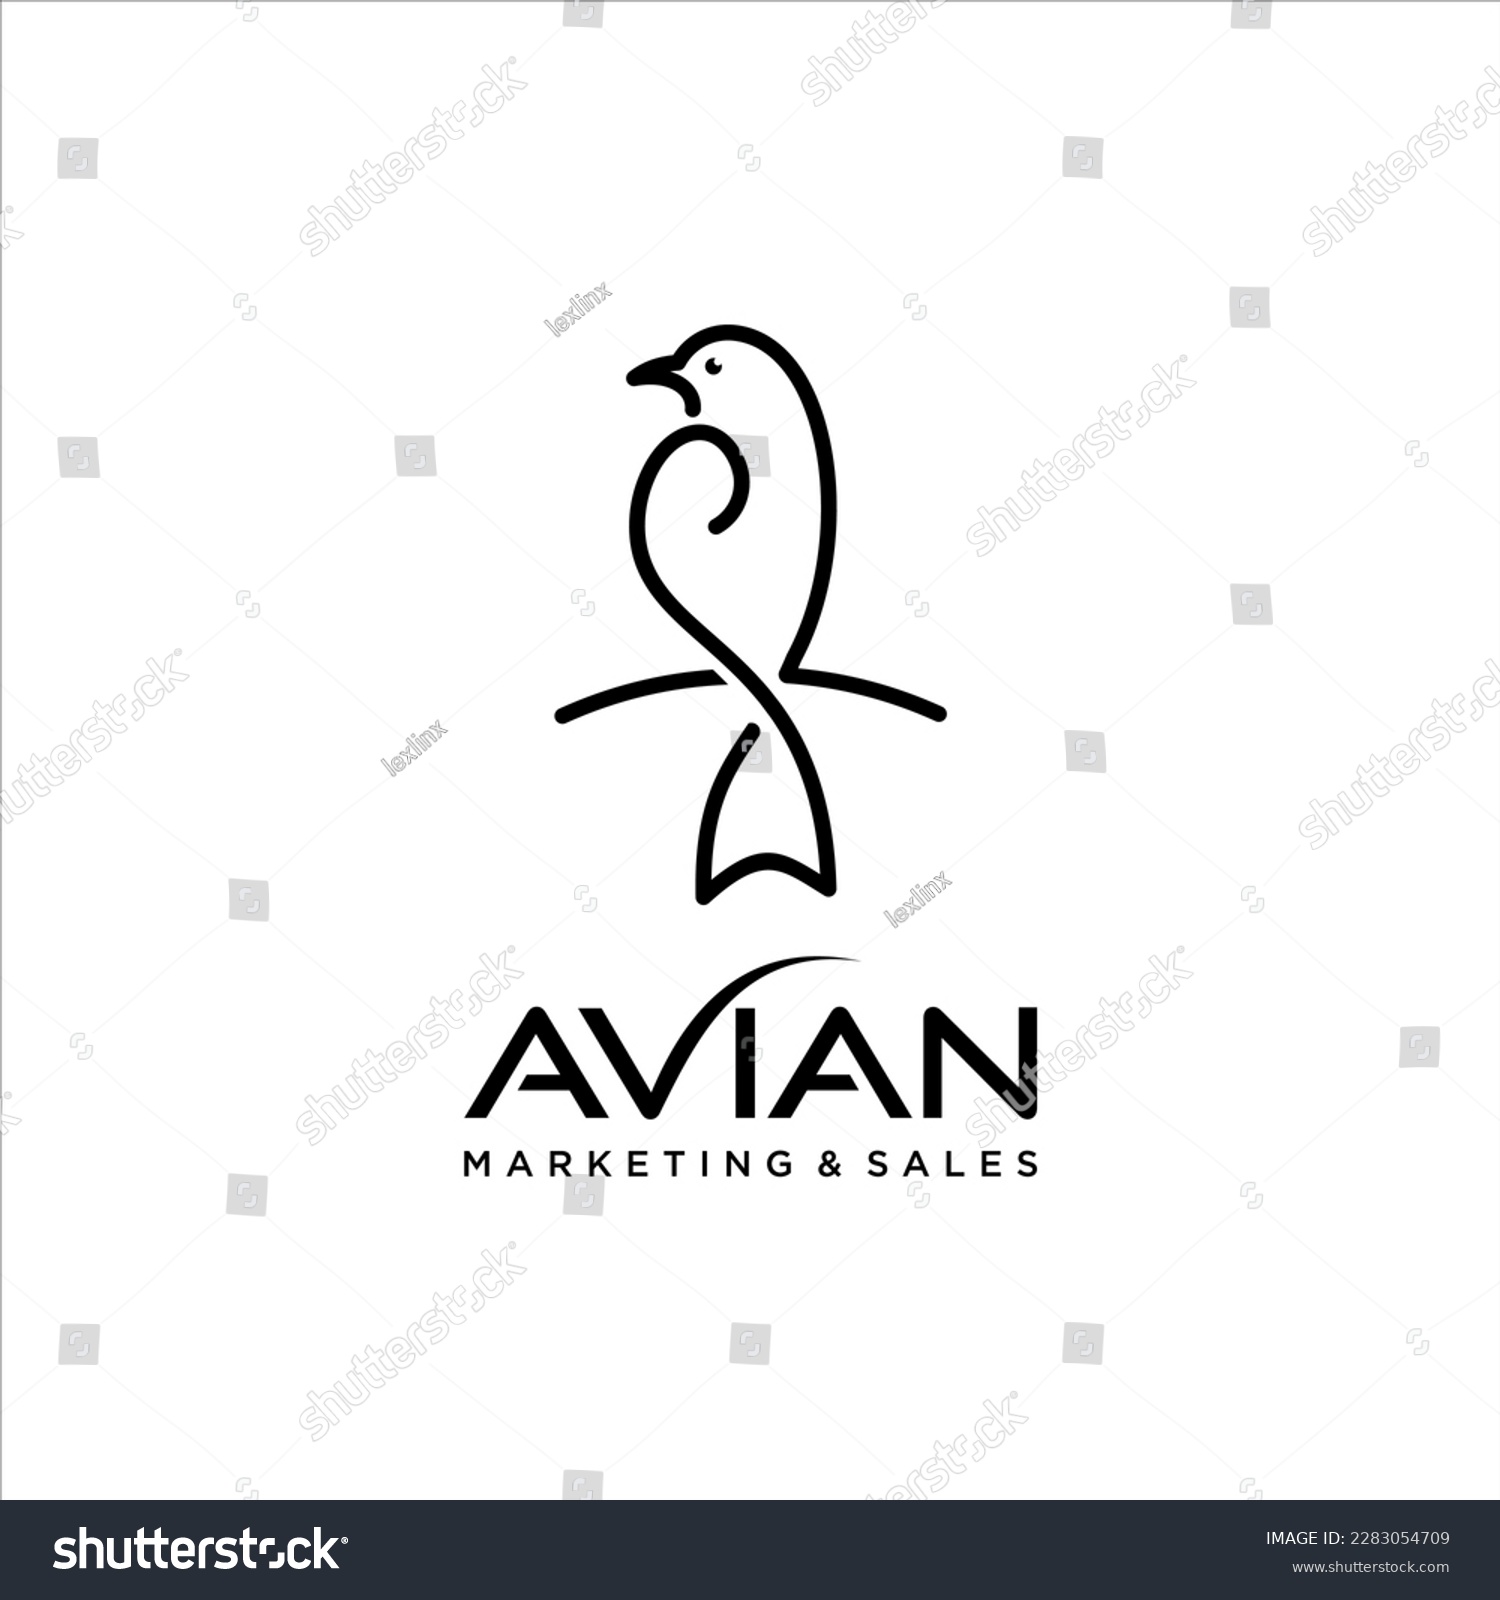 SVG of A bird with a black beak is sitting on a white background. svg